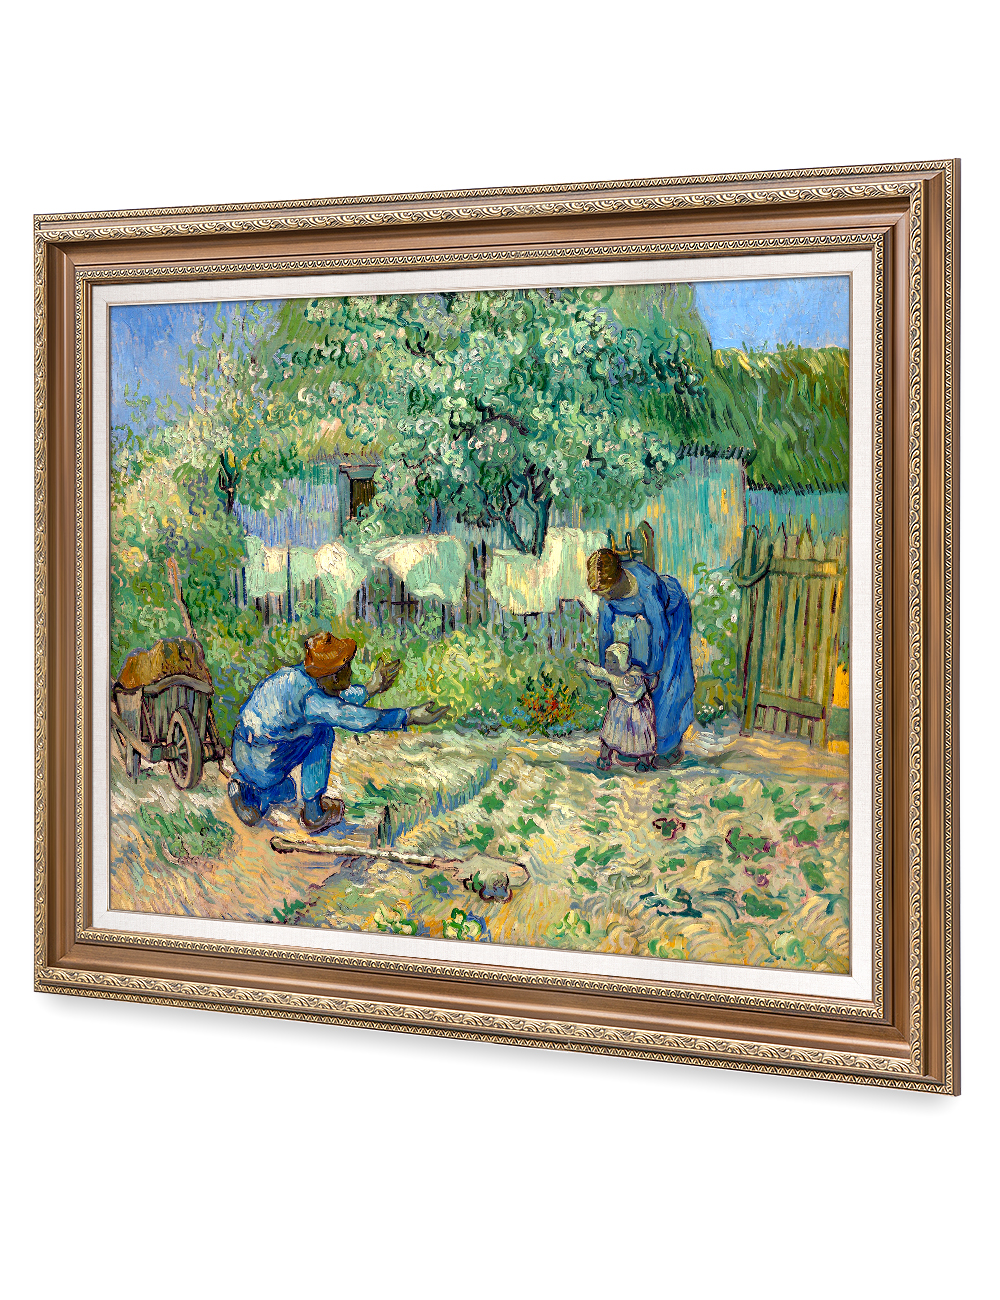 DECORARTS First Steps, after Millet, Vincent Van Gogh Art Reproduction. Acid  Free Cotton Canvas Giclee Print w/ Bronze FrameMat for Wall Decor. Framed  Size: 35x29 in